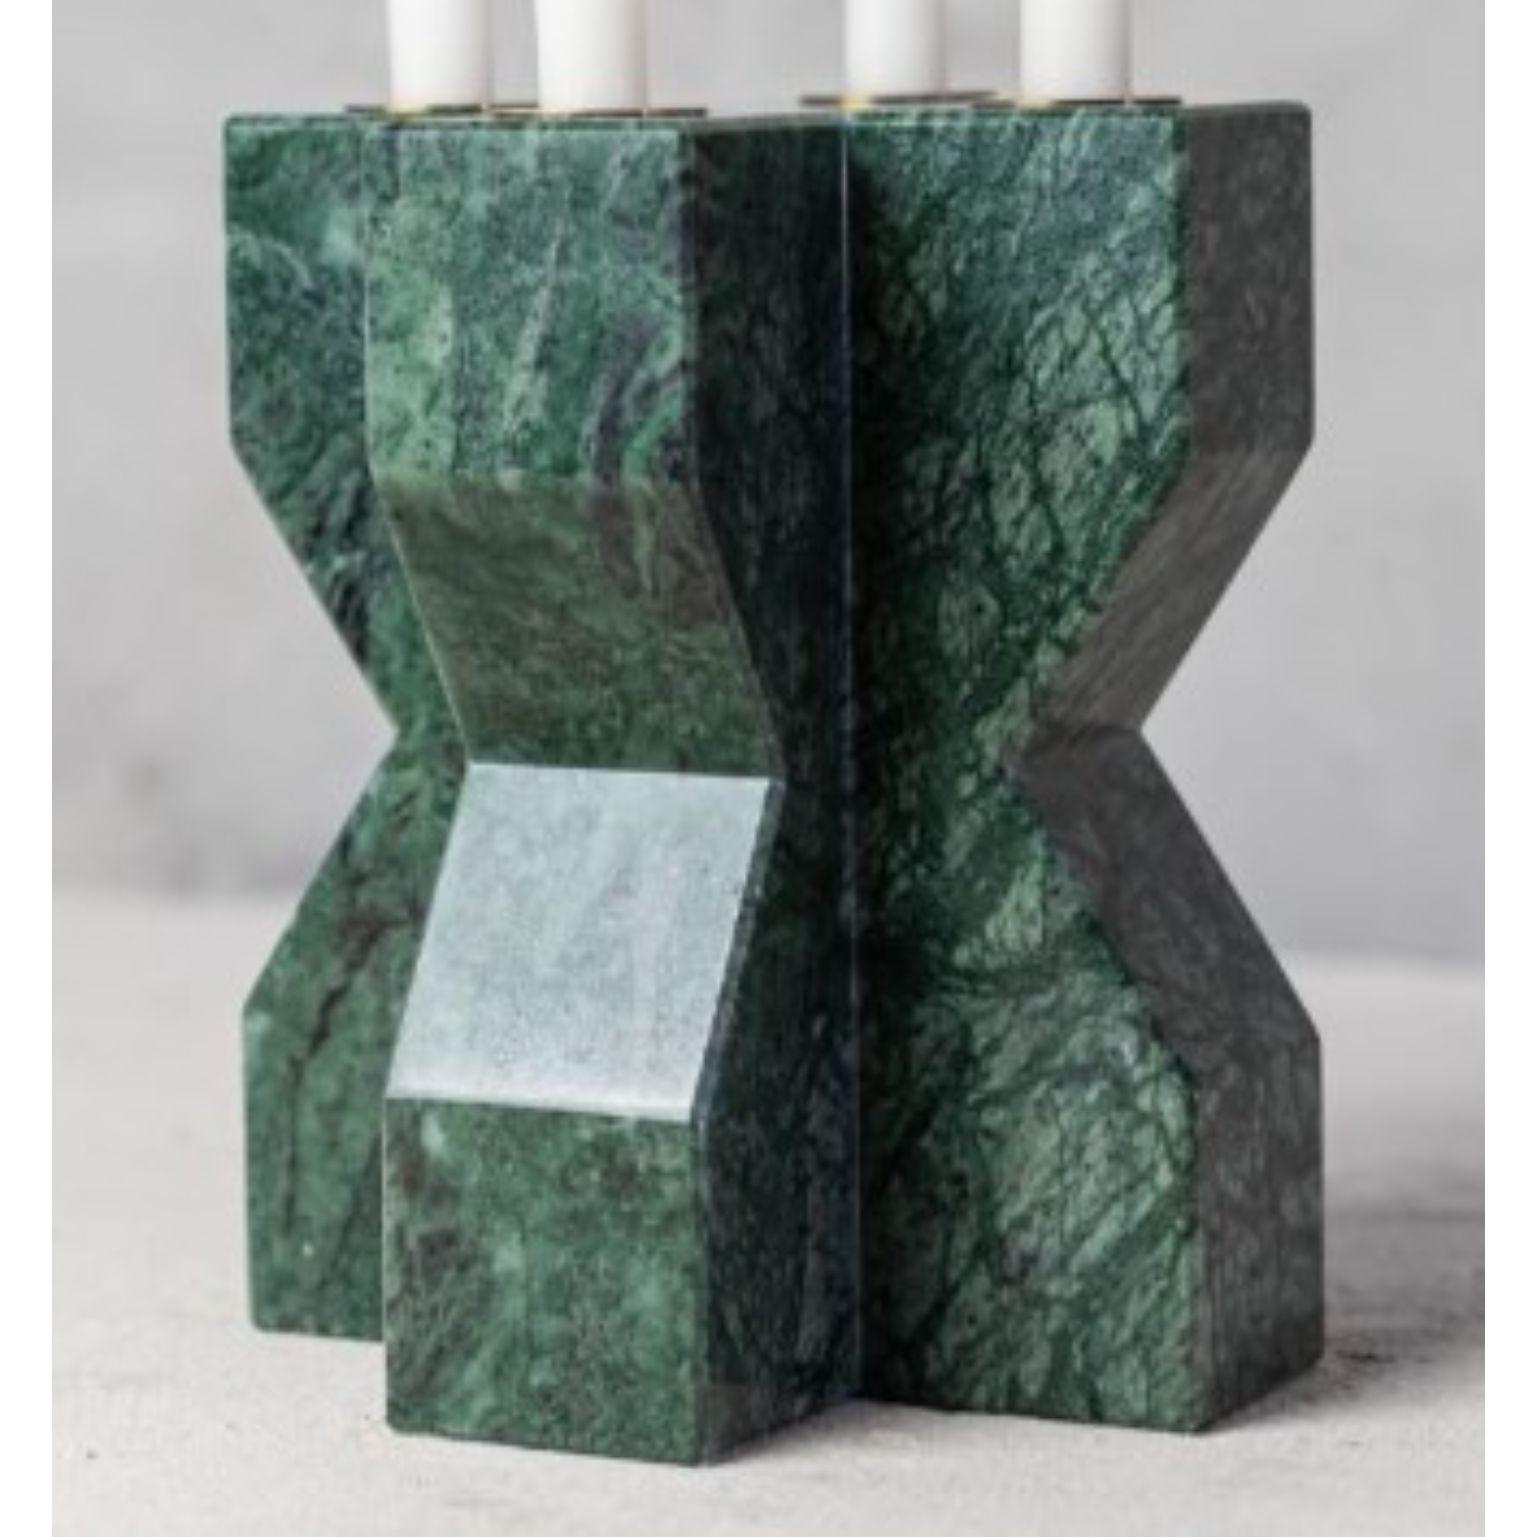 Fort marble candle holder by Essenzia
Materials: Brushed Brass, Carrara, Nero Marquina, India Green, Verde Viana
Dimensions: 15 x 15 x 18

Brutalist architectural style candle holder characterized by its presence and sharp angles. Sculptural